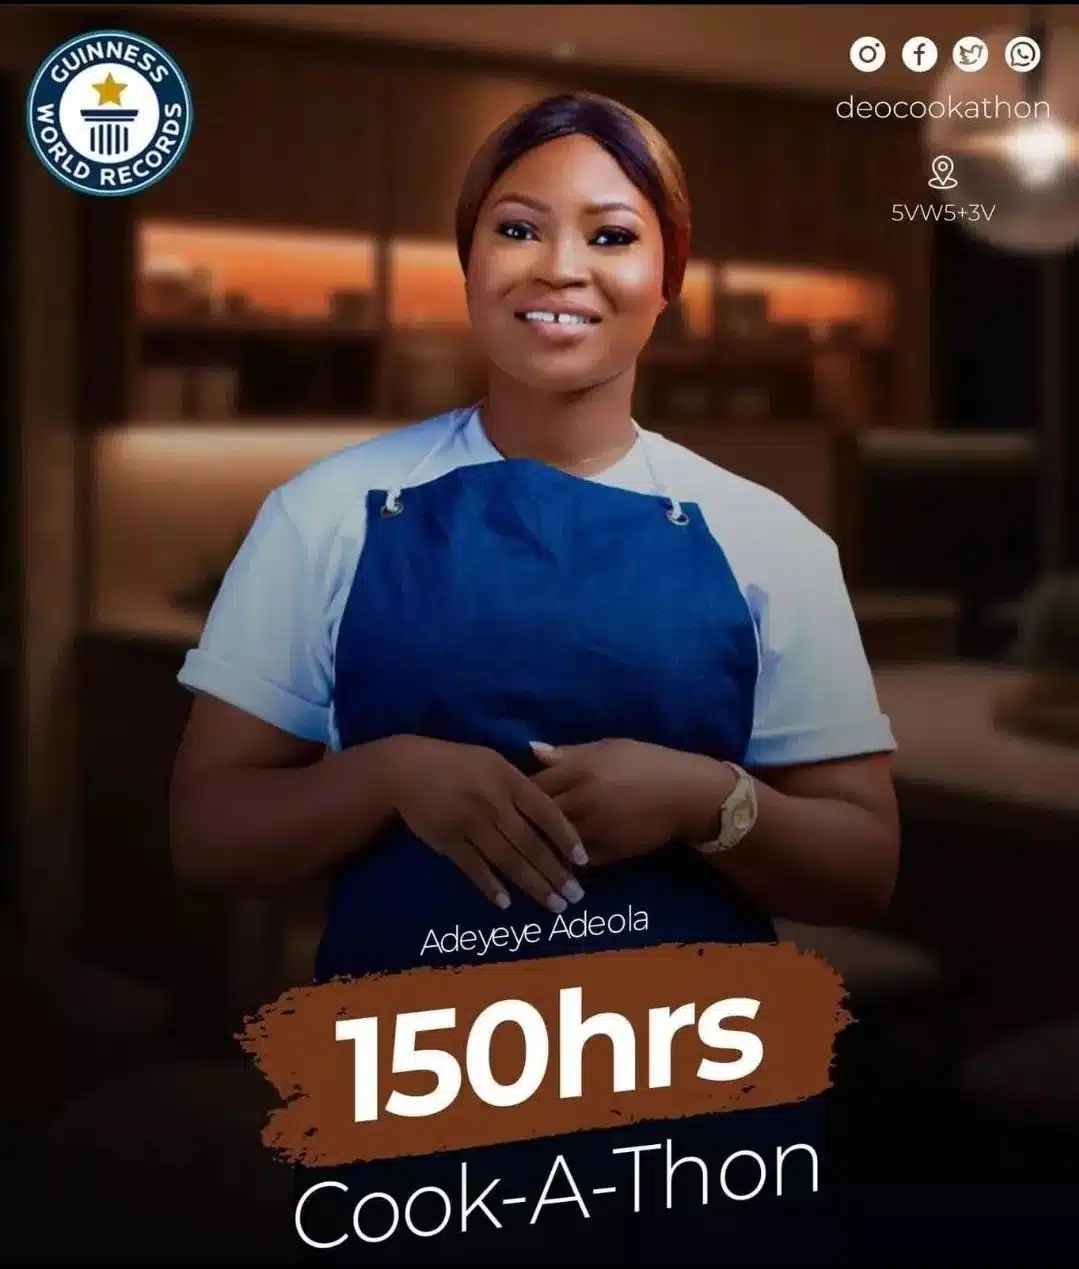 Ondo lady, Chef Deo crosses 5-hour mark, aims to break Hilda Baci’s record  Adeyeye adeola Chef Deo Cook-a-thon Guinness World Record